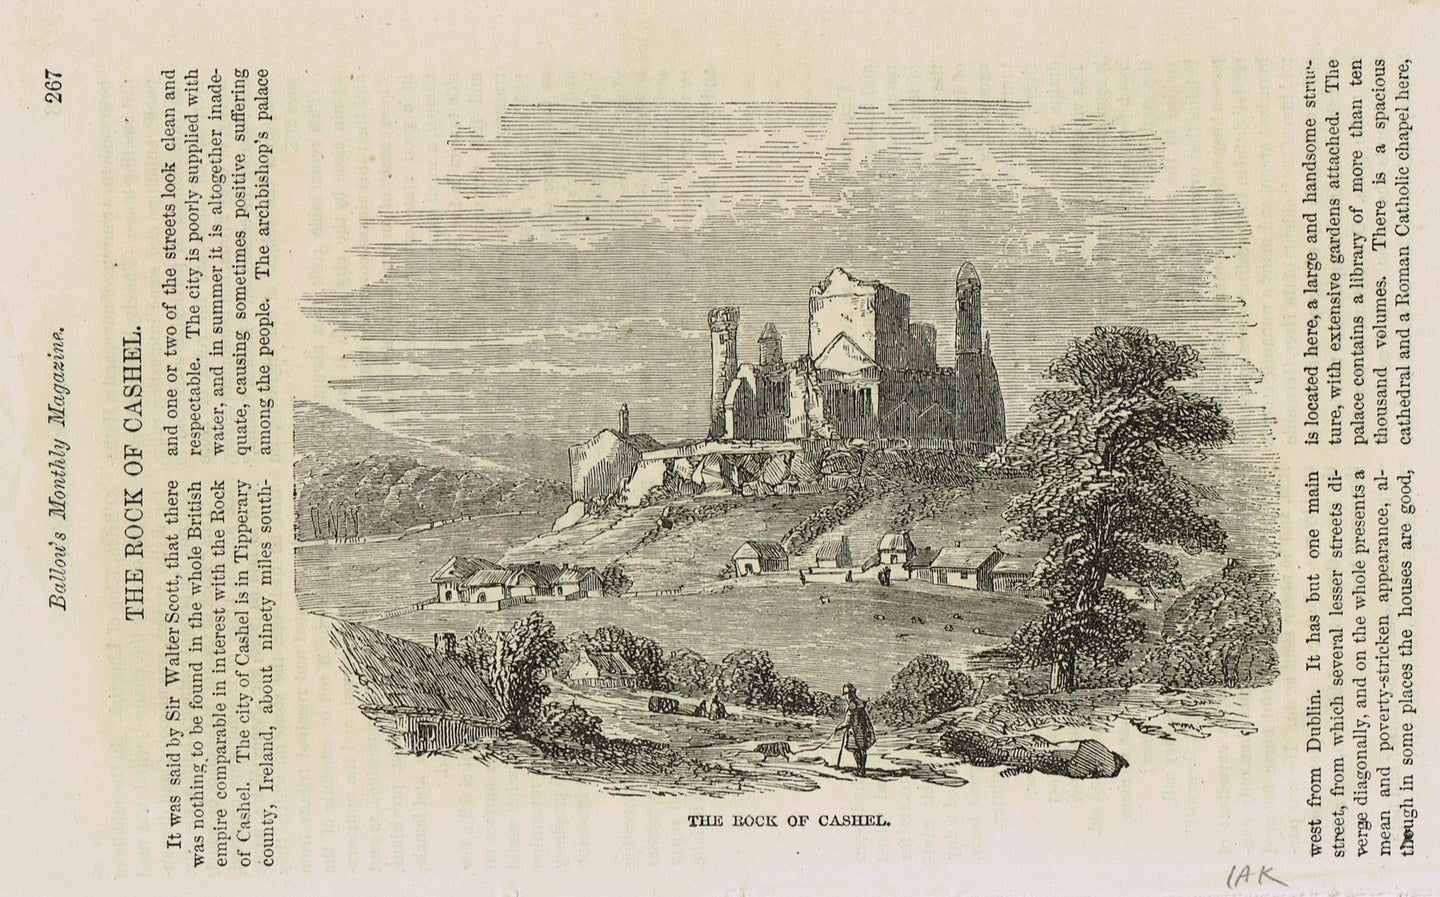 Genuine-Antique-Print-The-Rock-of-Cashel-Ireland--19th-century-Unknown-Publisher-Maps-Of-Antiquity